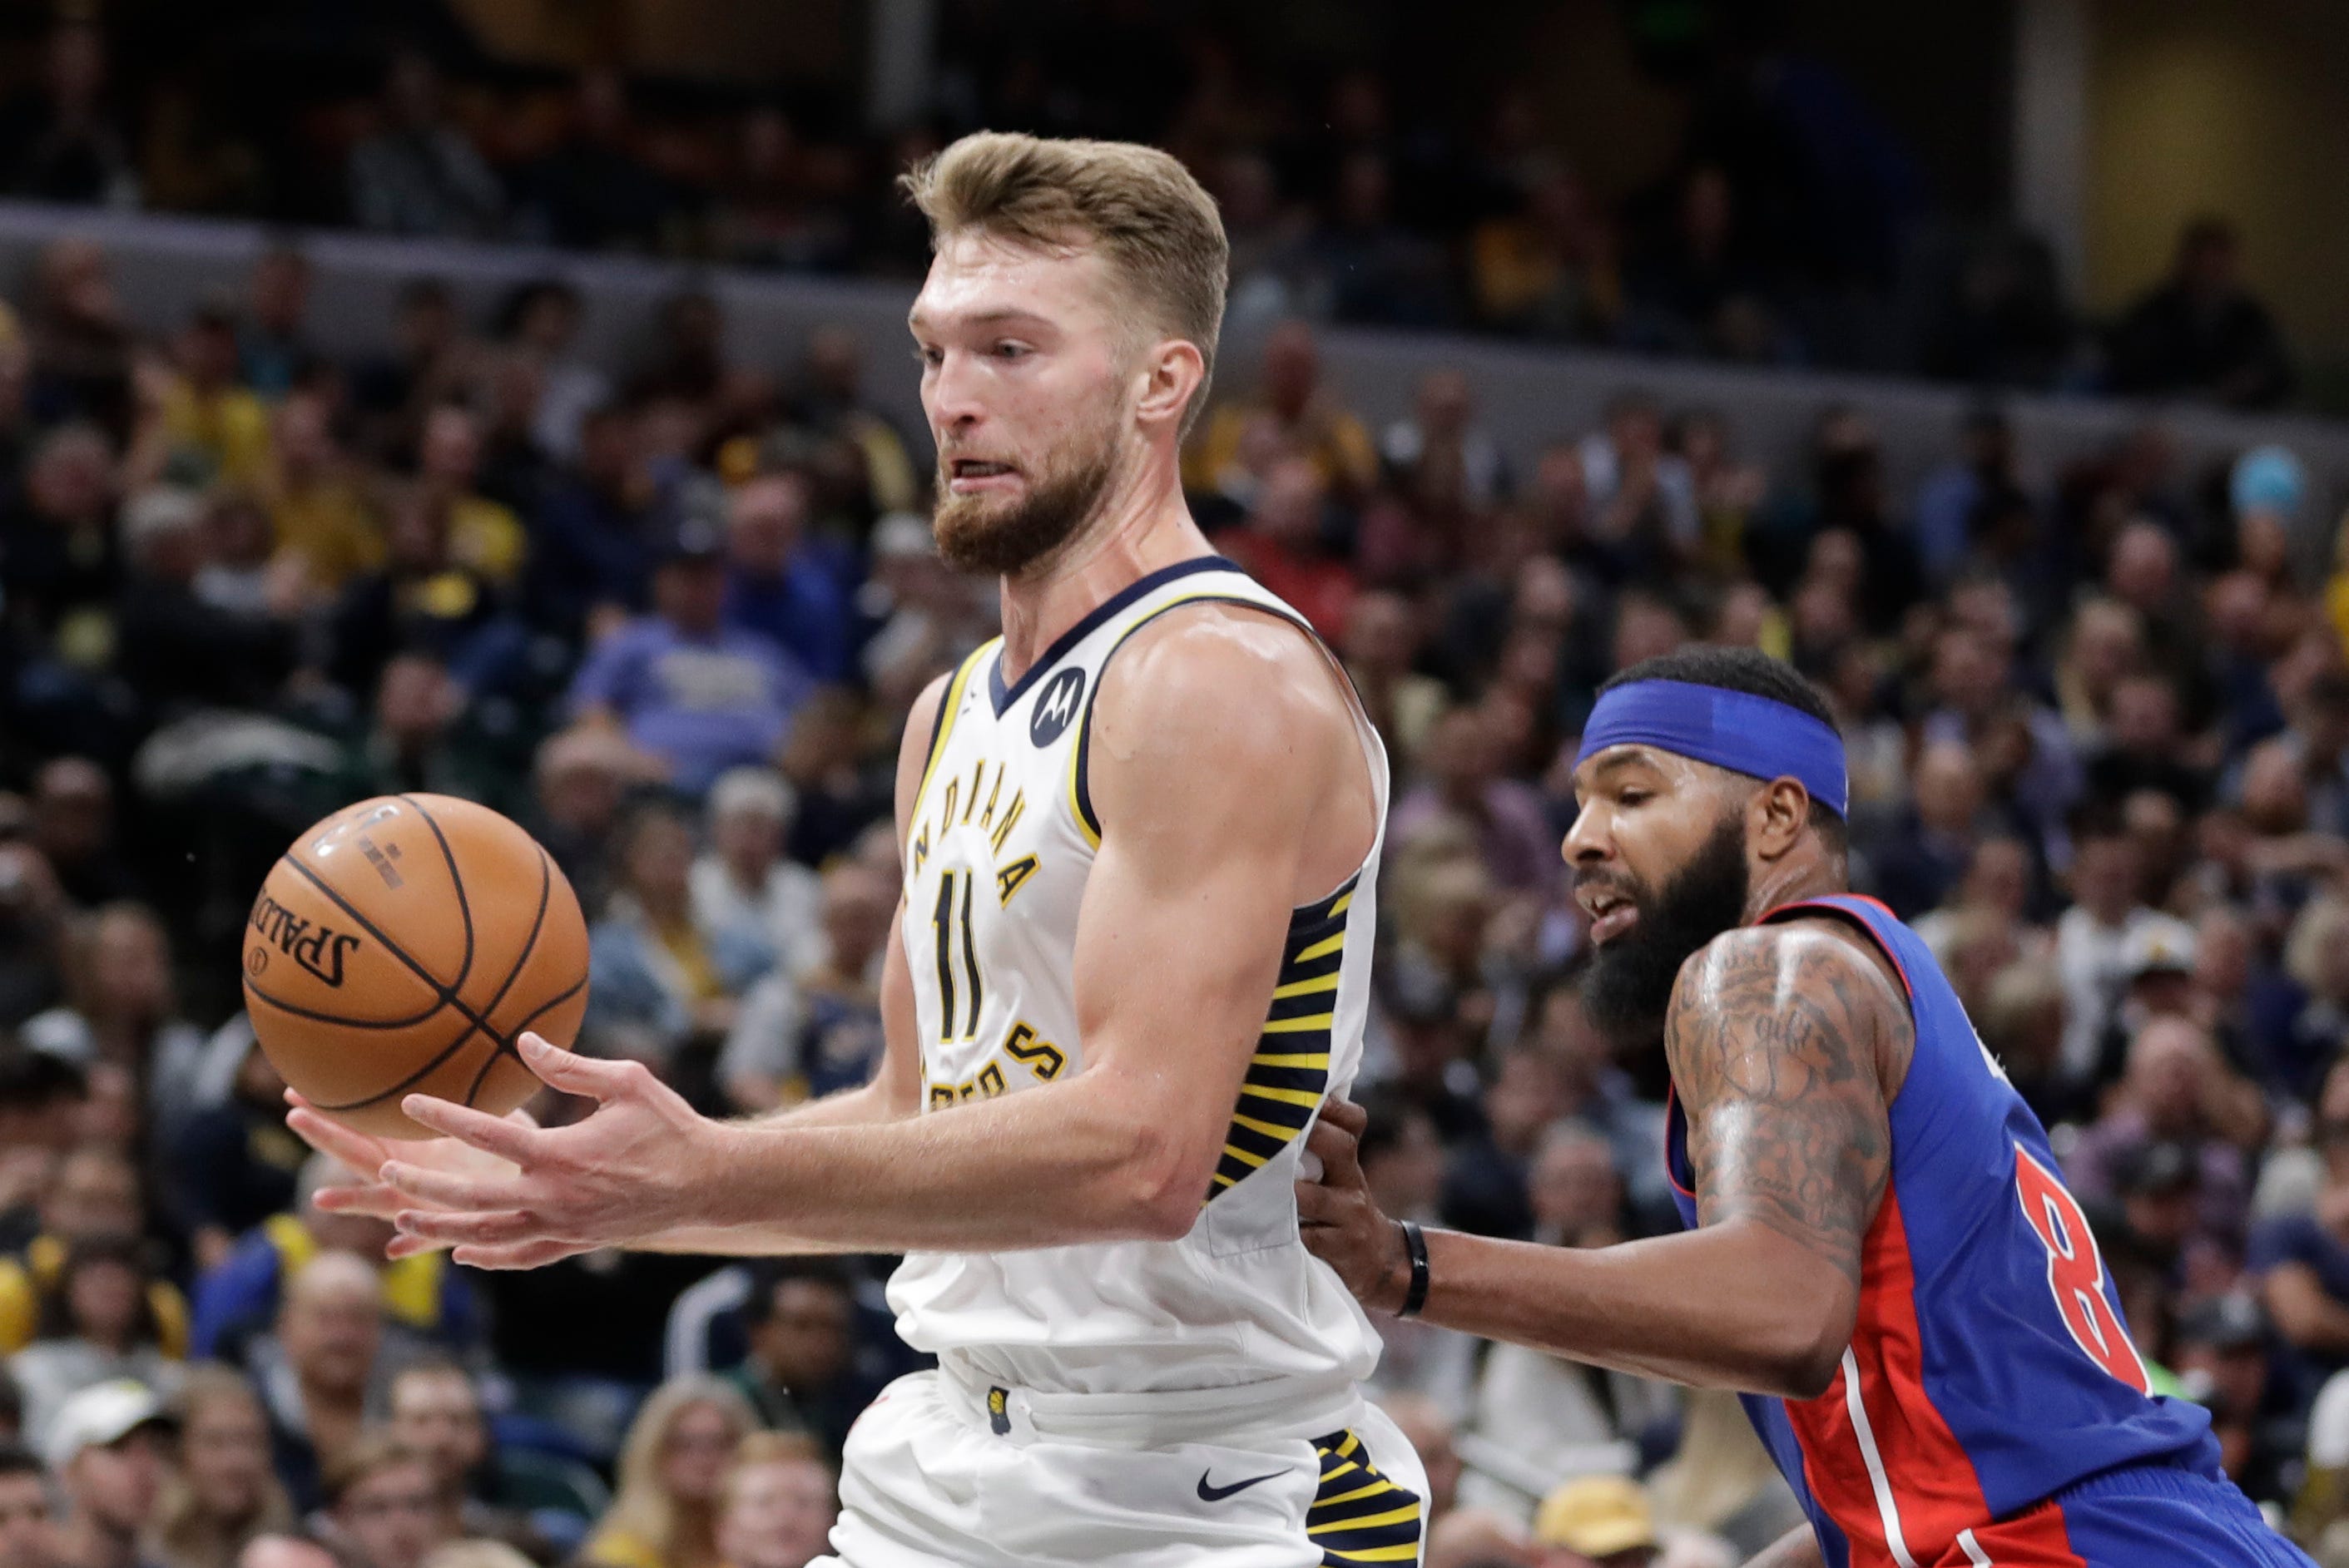 Indiana Pacers ' Domantas Sabonis, left, is defended by Detroit Pistons ' Markieff Morris during the second half.